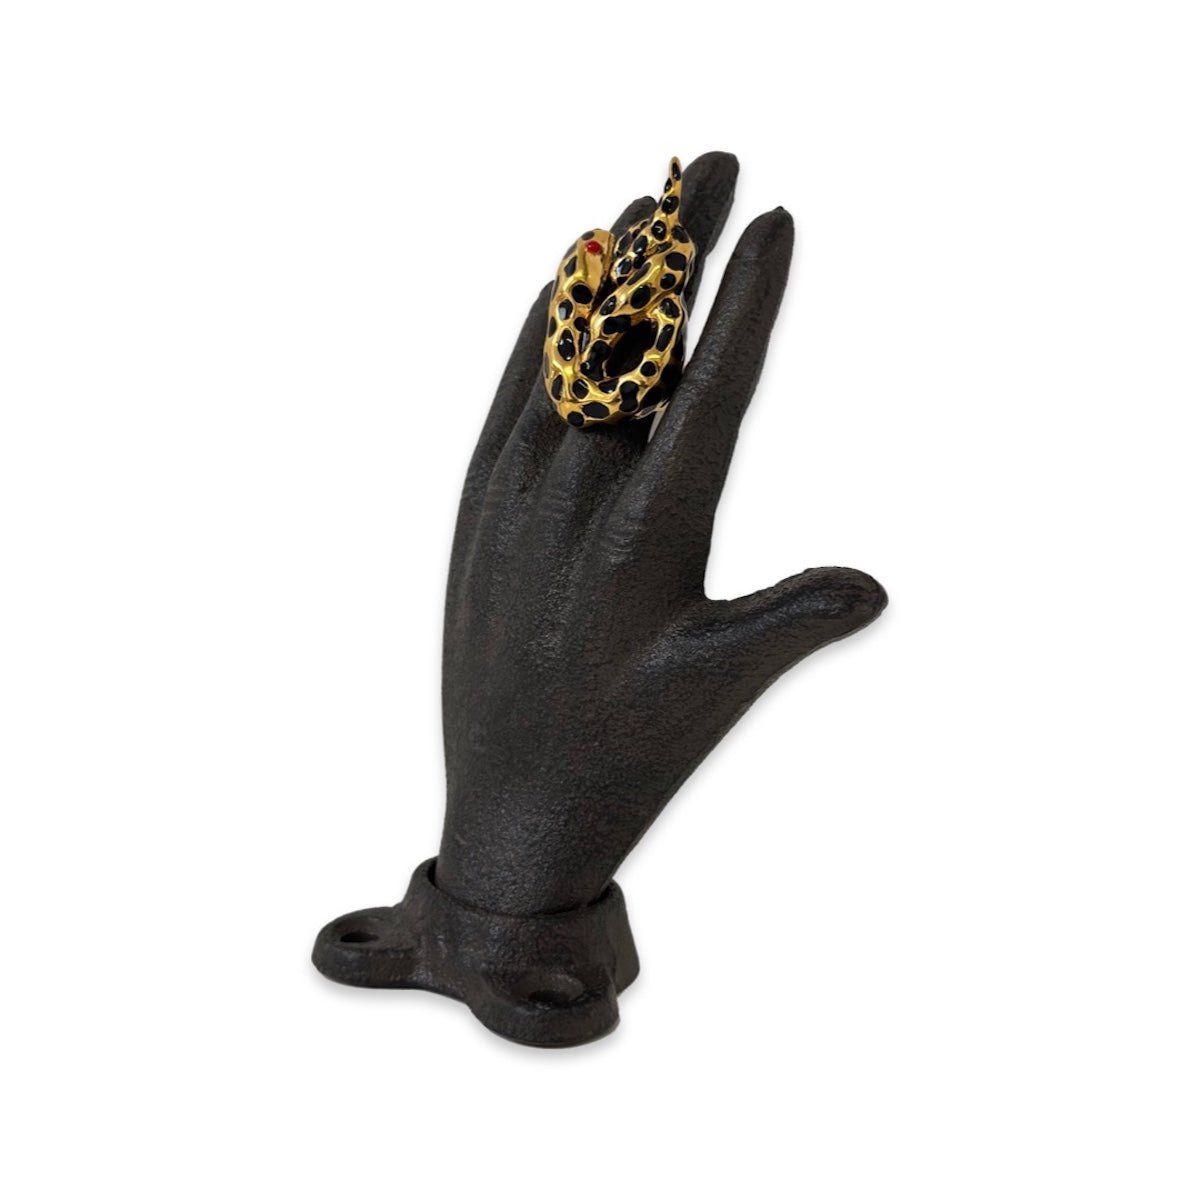 Black "Serpiente" Snake Ring on a black hand sculpture on a white background